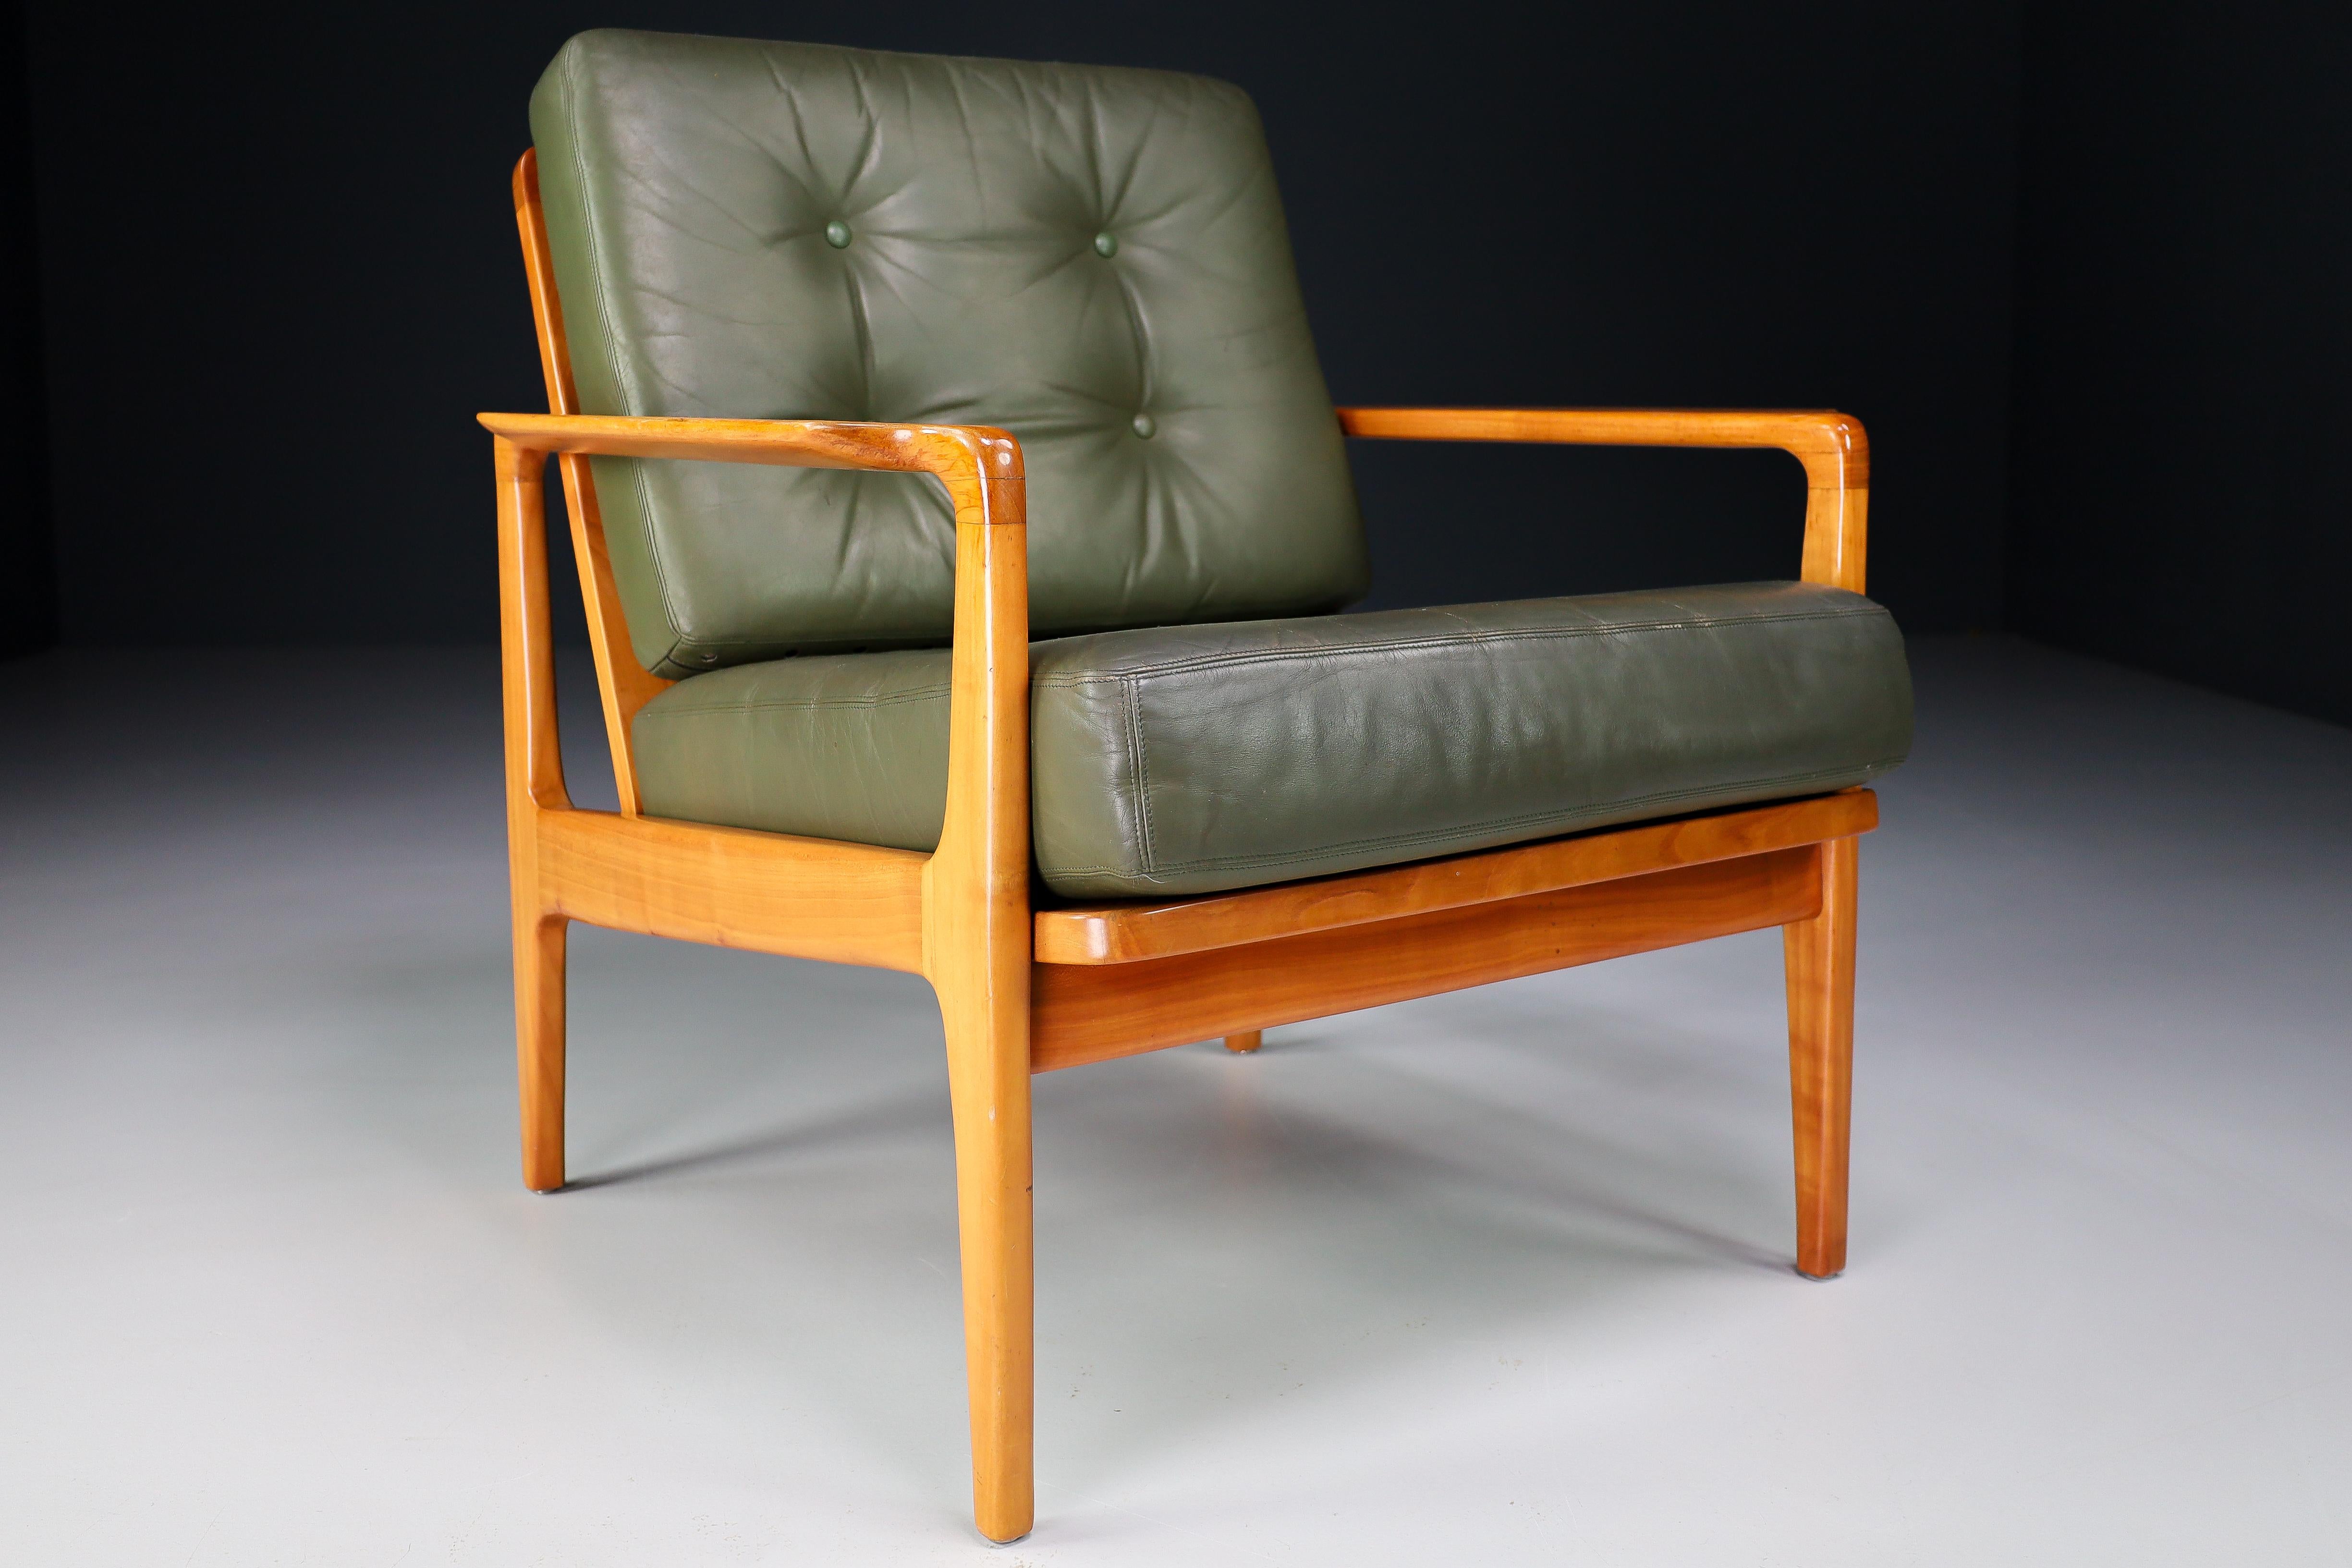 Midcentury Danish lounge chairs by Arne Wahl Iversen in green leather, Denmark 1960s. These armchairs would make an eye-catching addition to any interior such as living room, family room, screening room or even in the office. It also perfectly fits